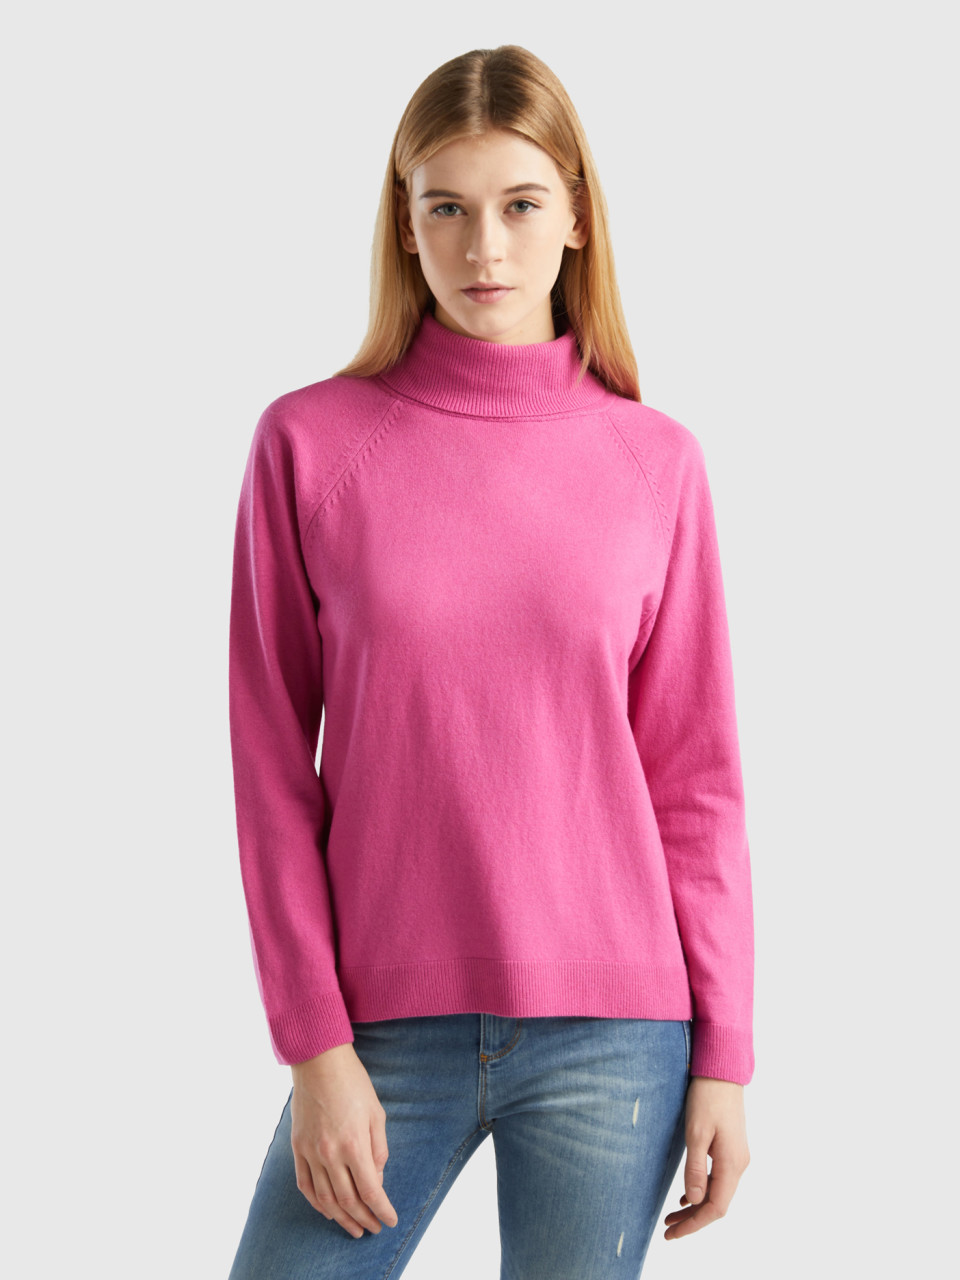 Benetton, Pink Turtleneck Sweater In Cashmere And Wool Blend, Pink, Women